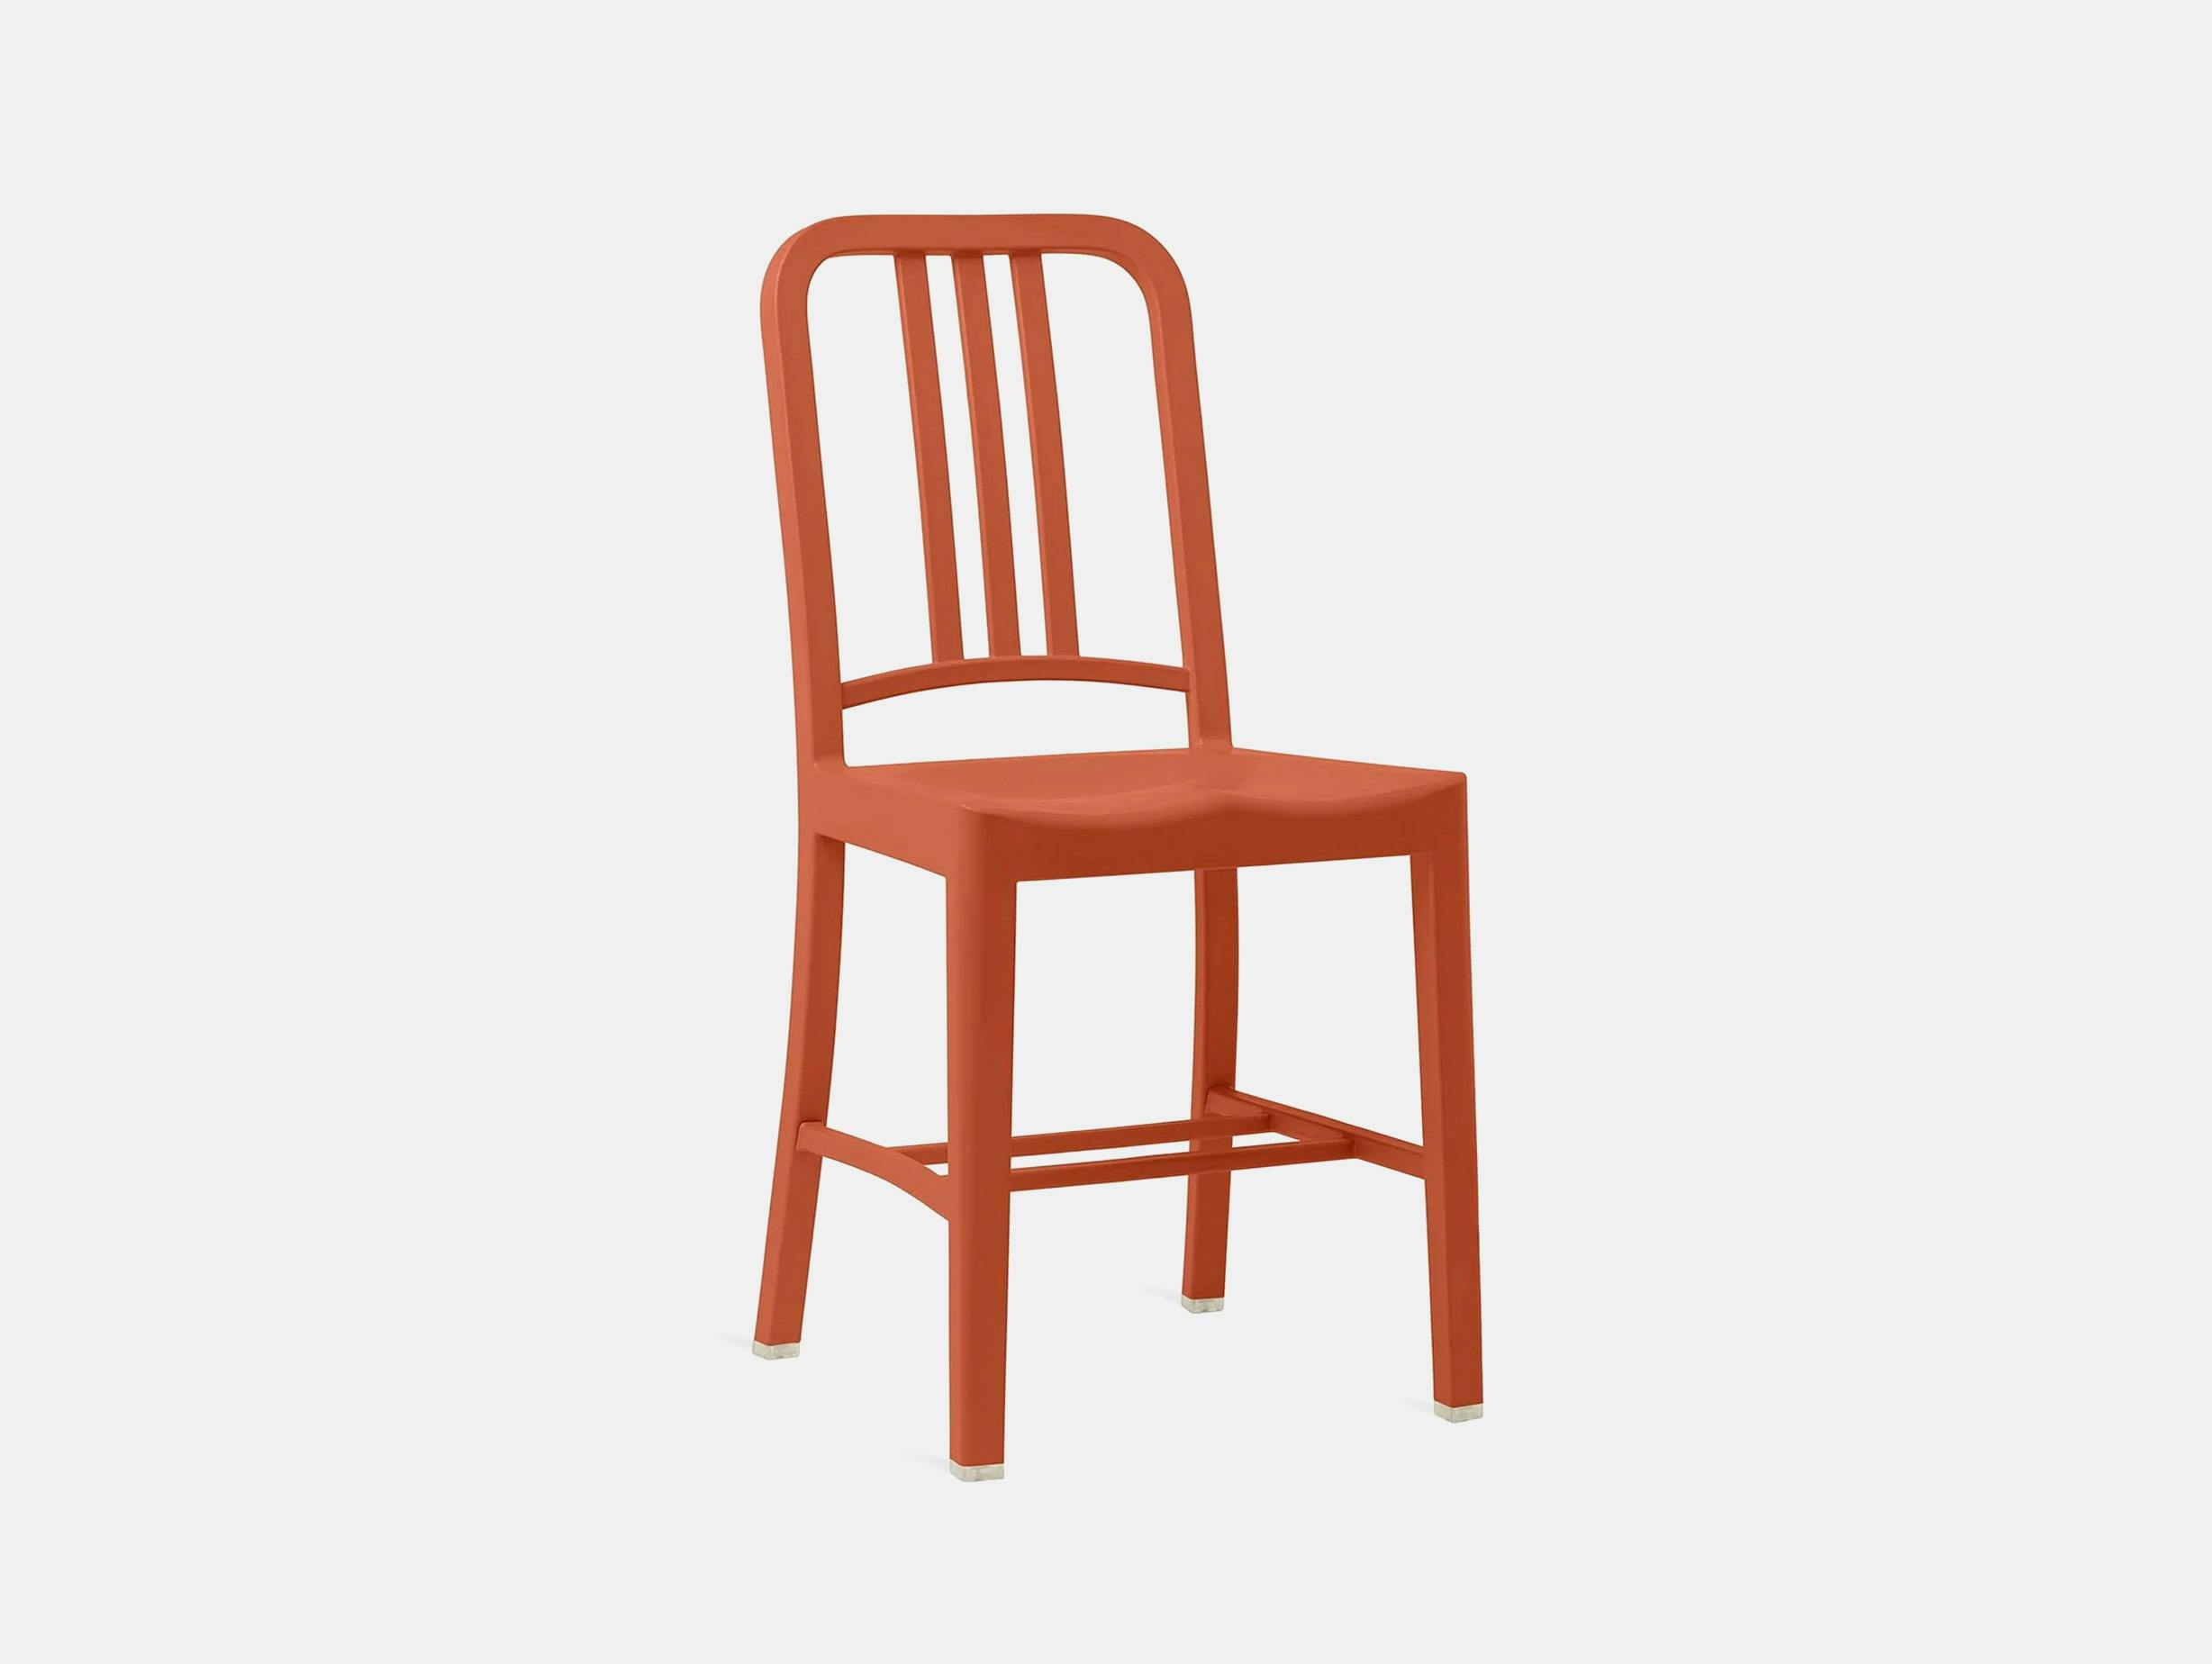 Emeco 111 navy chair persimmmon